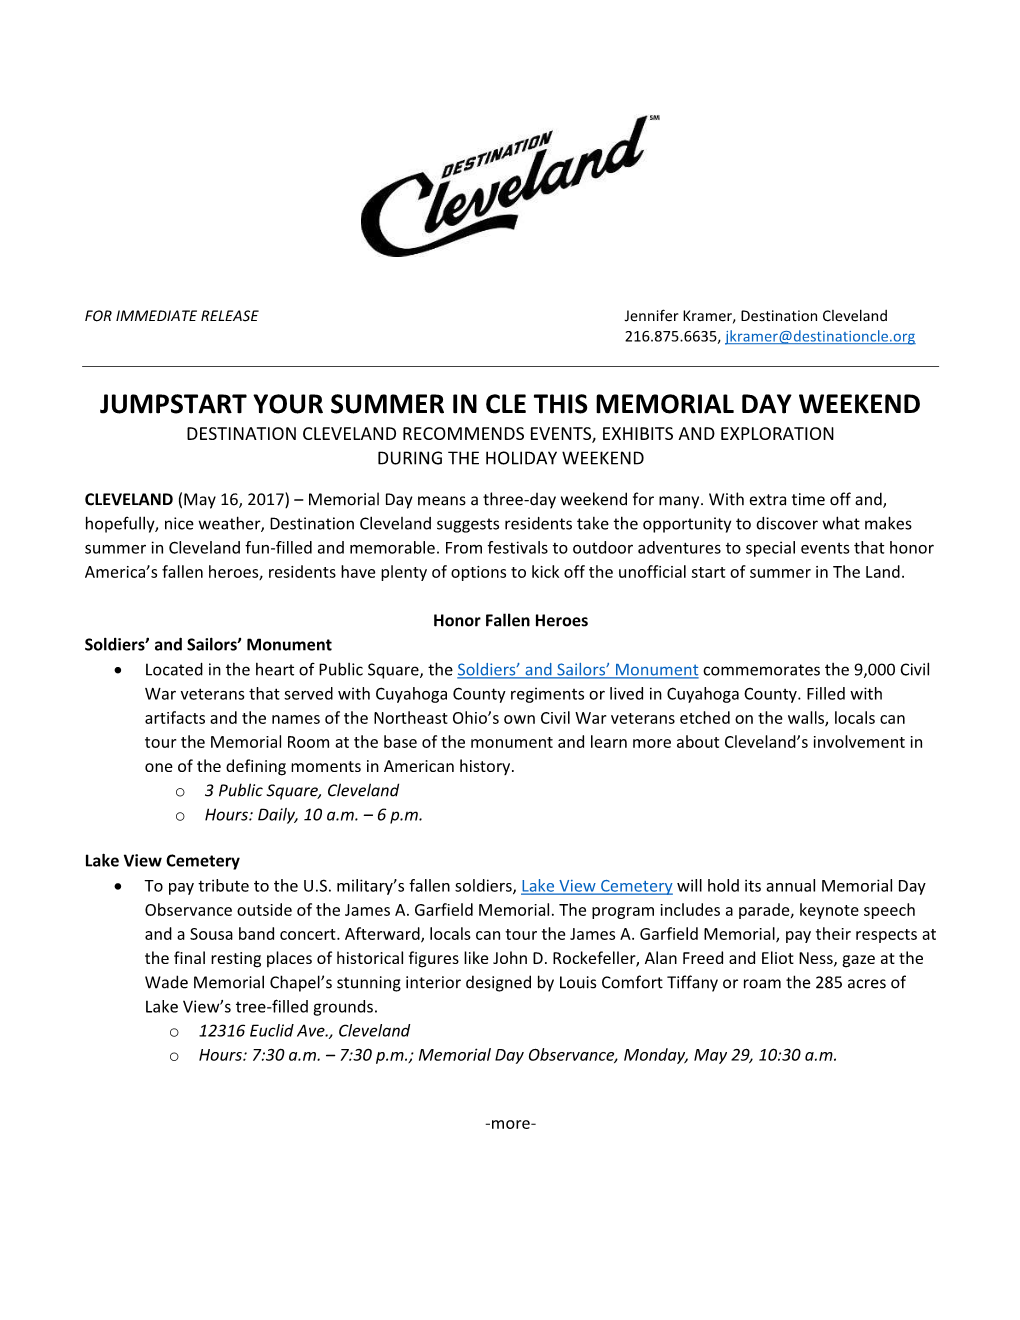 Jumpstart Your Summer in Cle This Memorial Day Weekend Destination Cleveland Recommends Events, Exhibits and Exploration During the Holiday Weekend